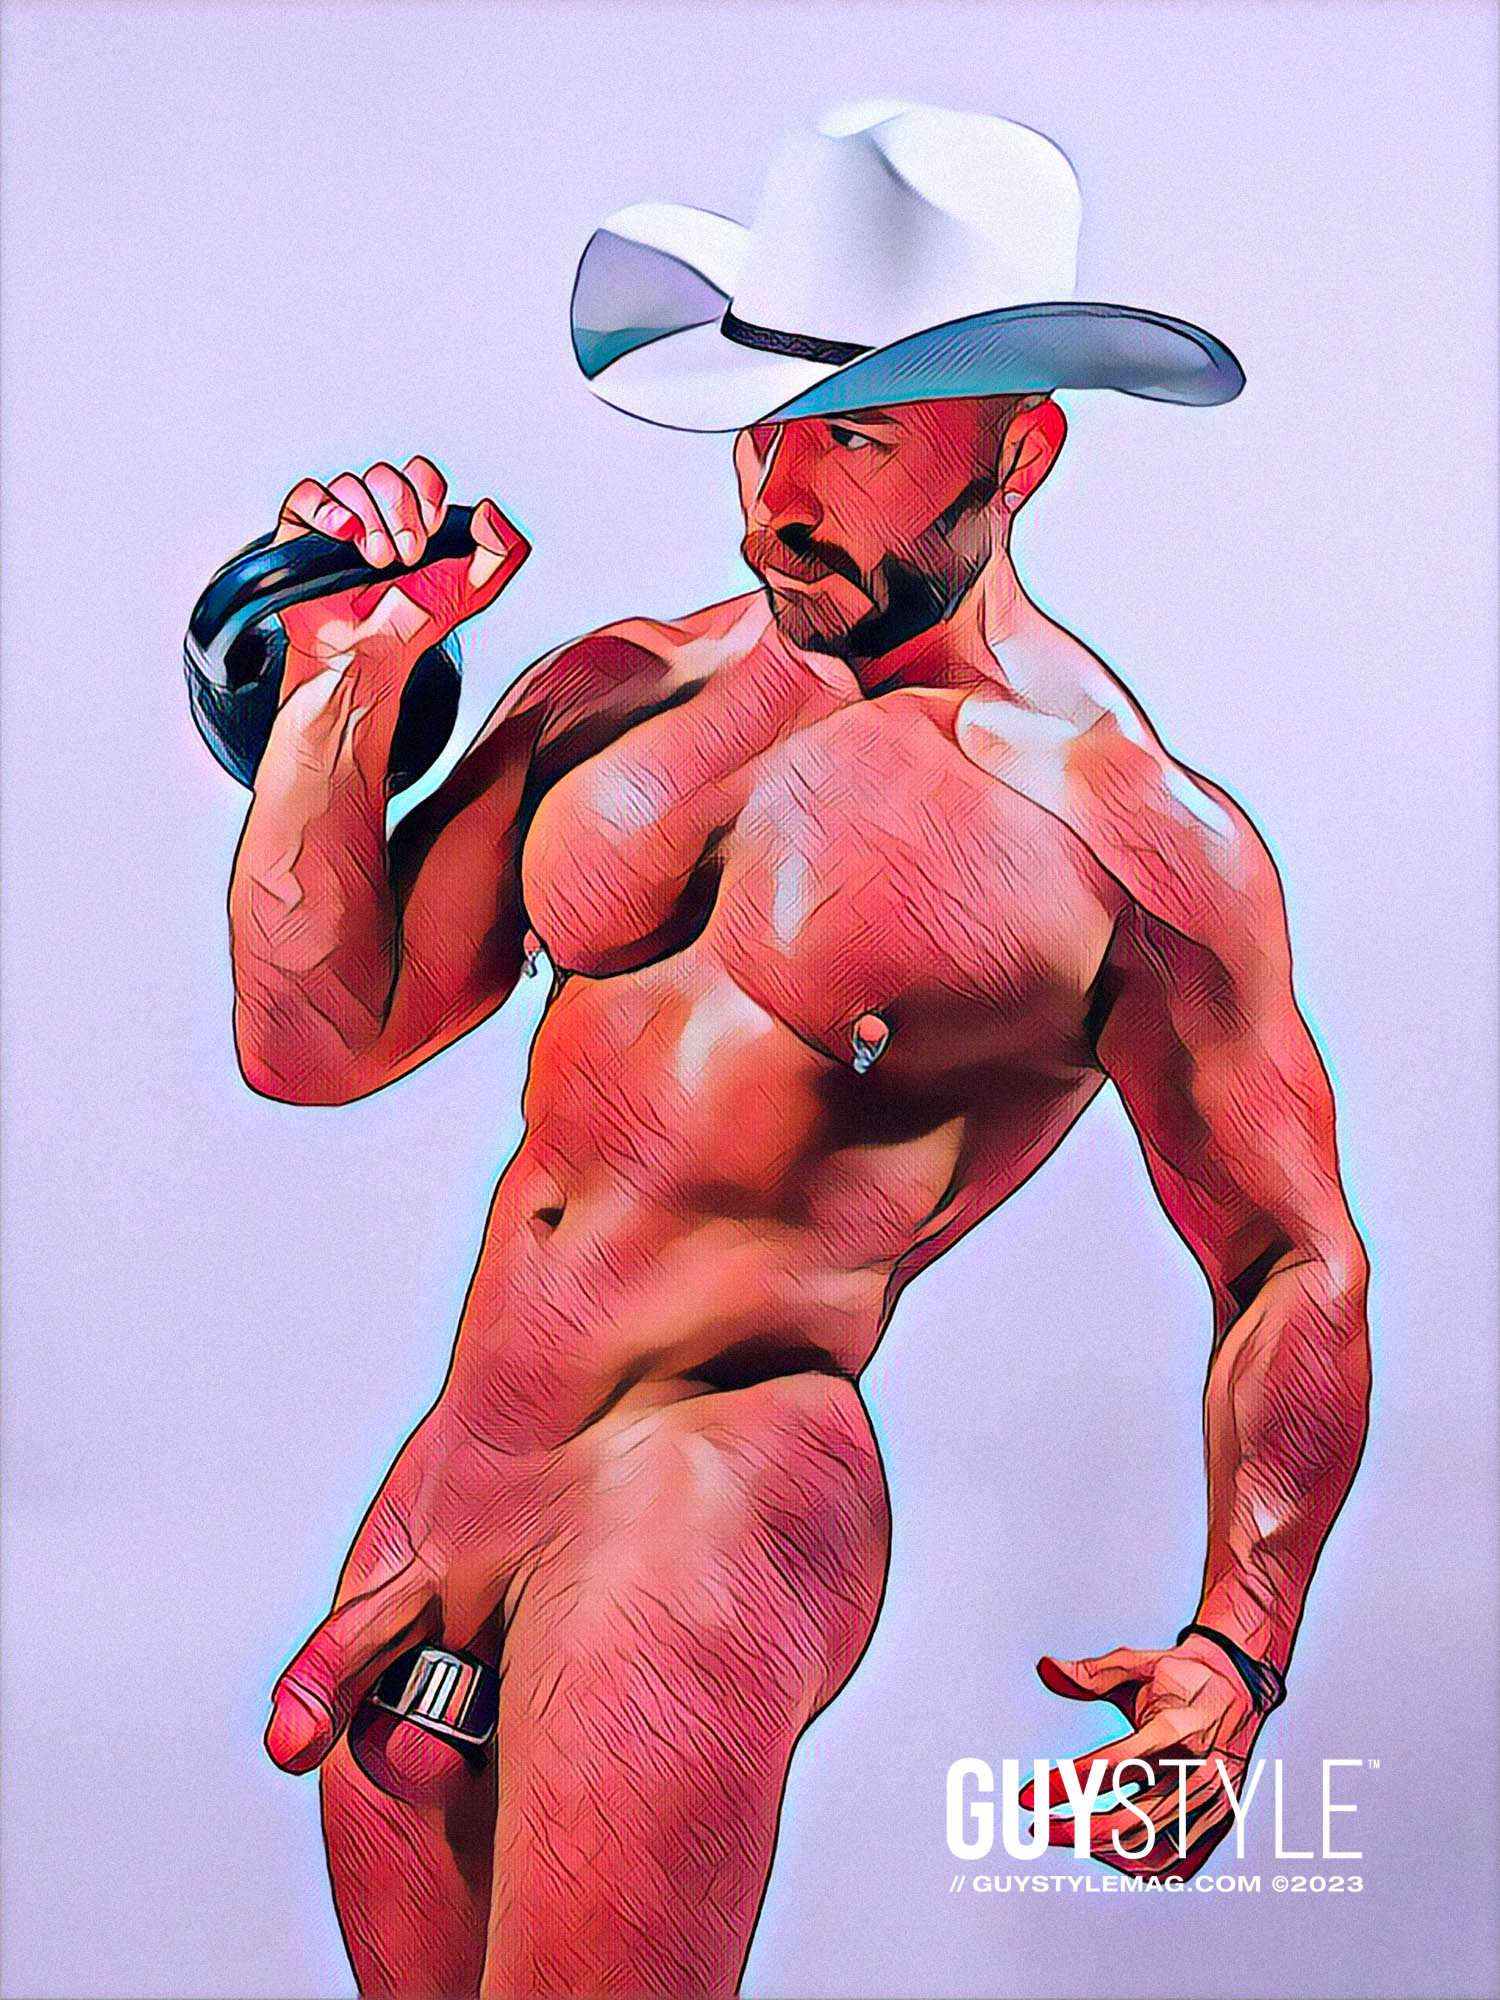 Gay Art for Sale: The Evolution of Homoerotic Art in NYC and the Inspiring Journey of Maxwell Alexander – Presented by HARD NEW YORK